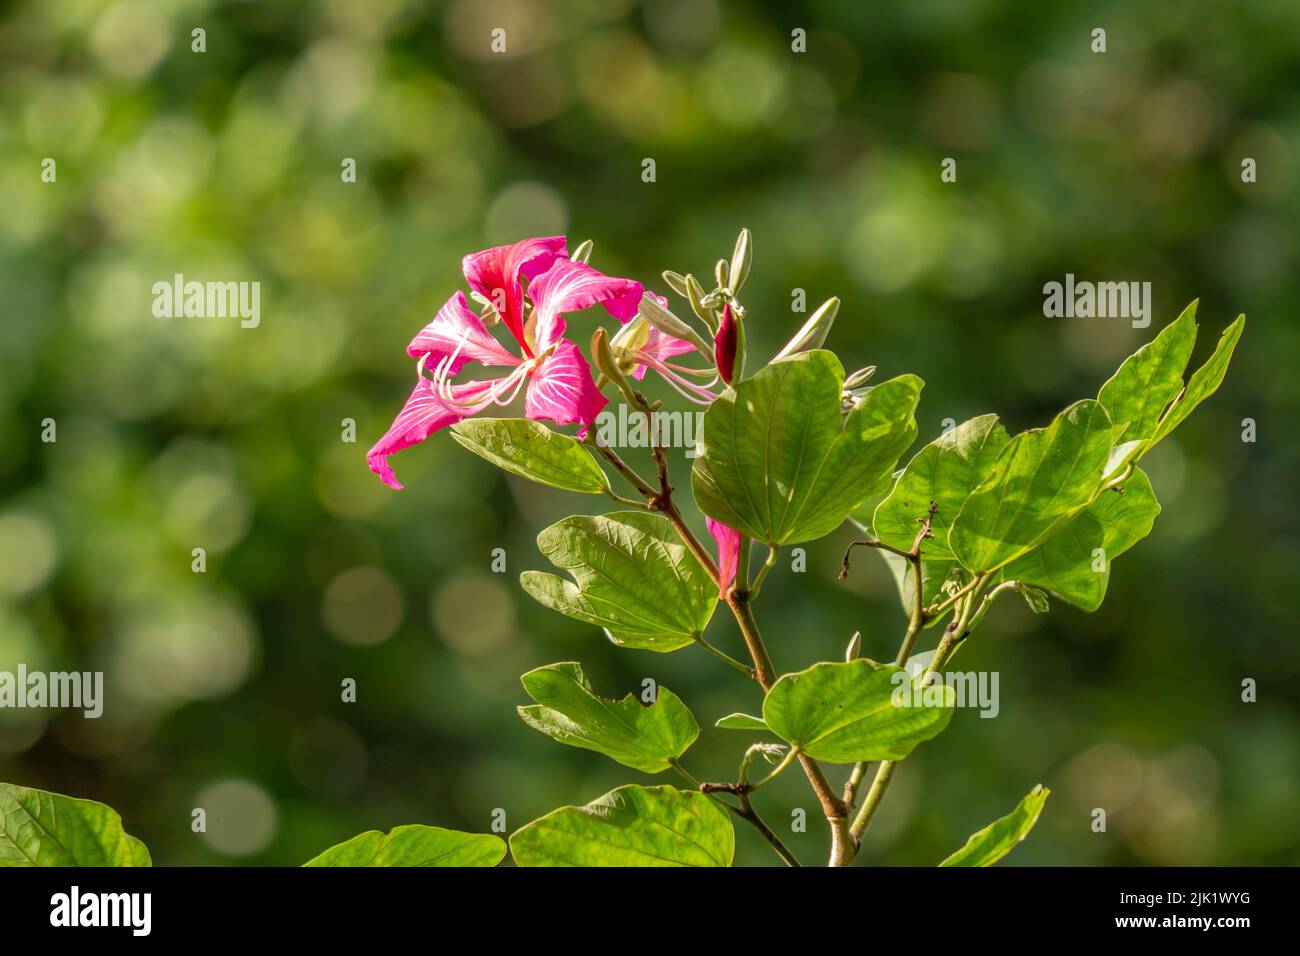 A pink blooming bauhinia flower, with a blurry green foliage background Stock Photo